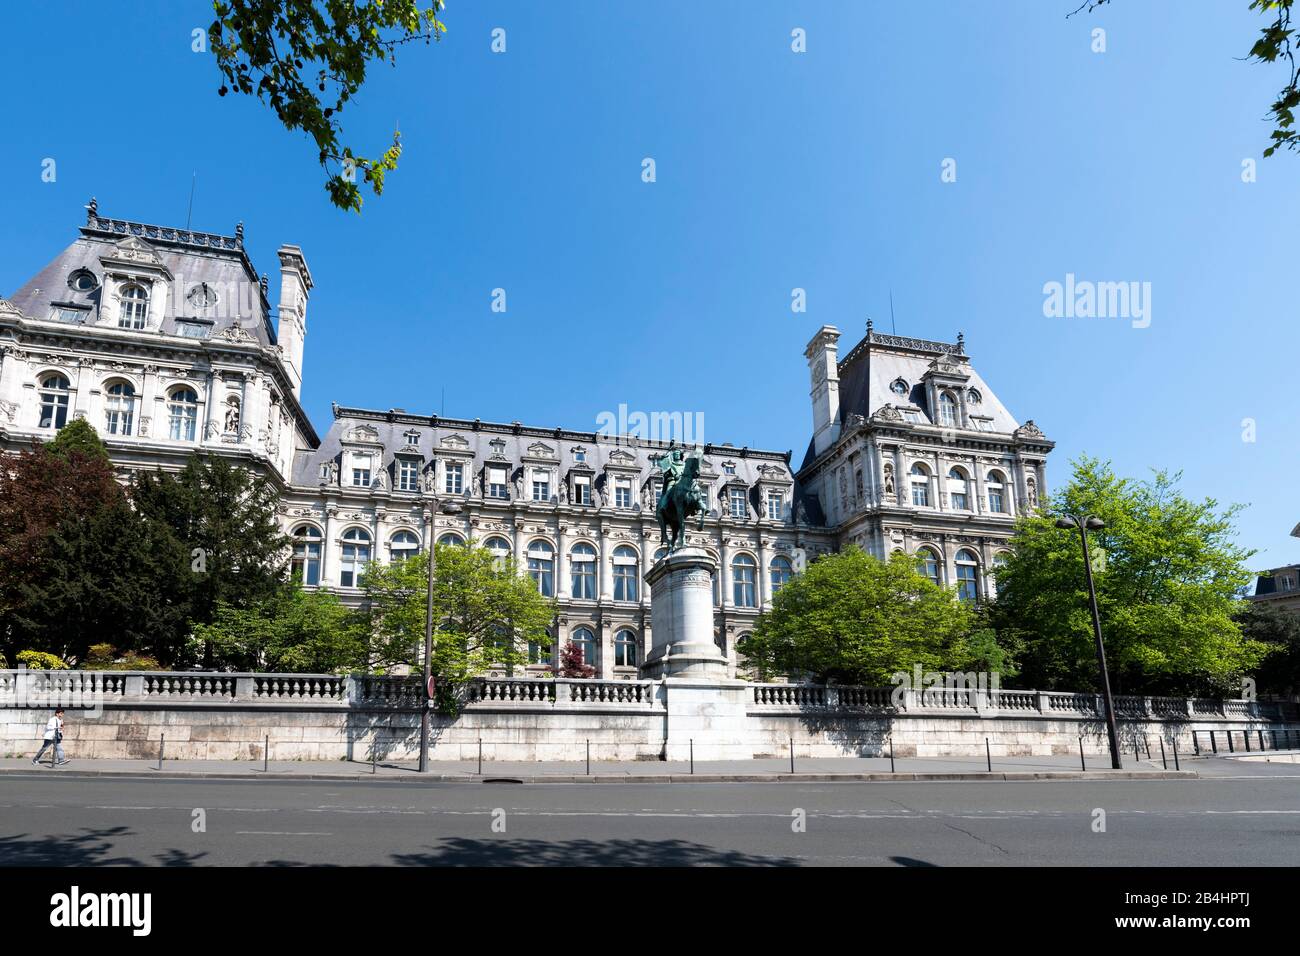 Equestrian statue of the Étienne Marcel on the south side of the famous Hotel de Ville, Paris, France, Europe Stock Photo